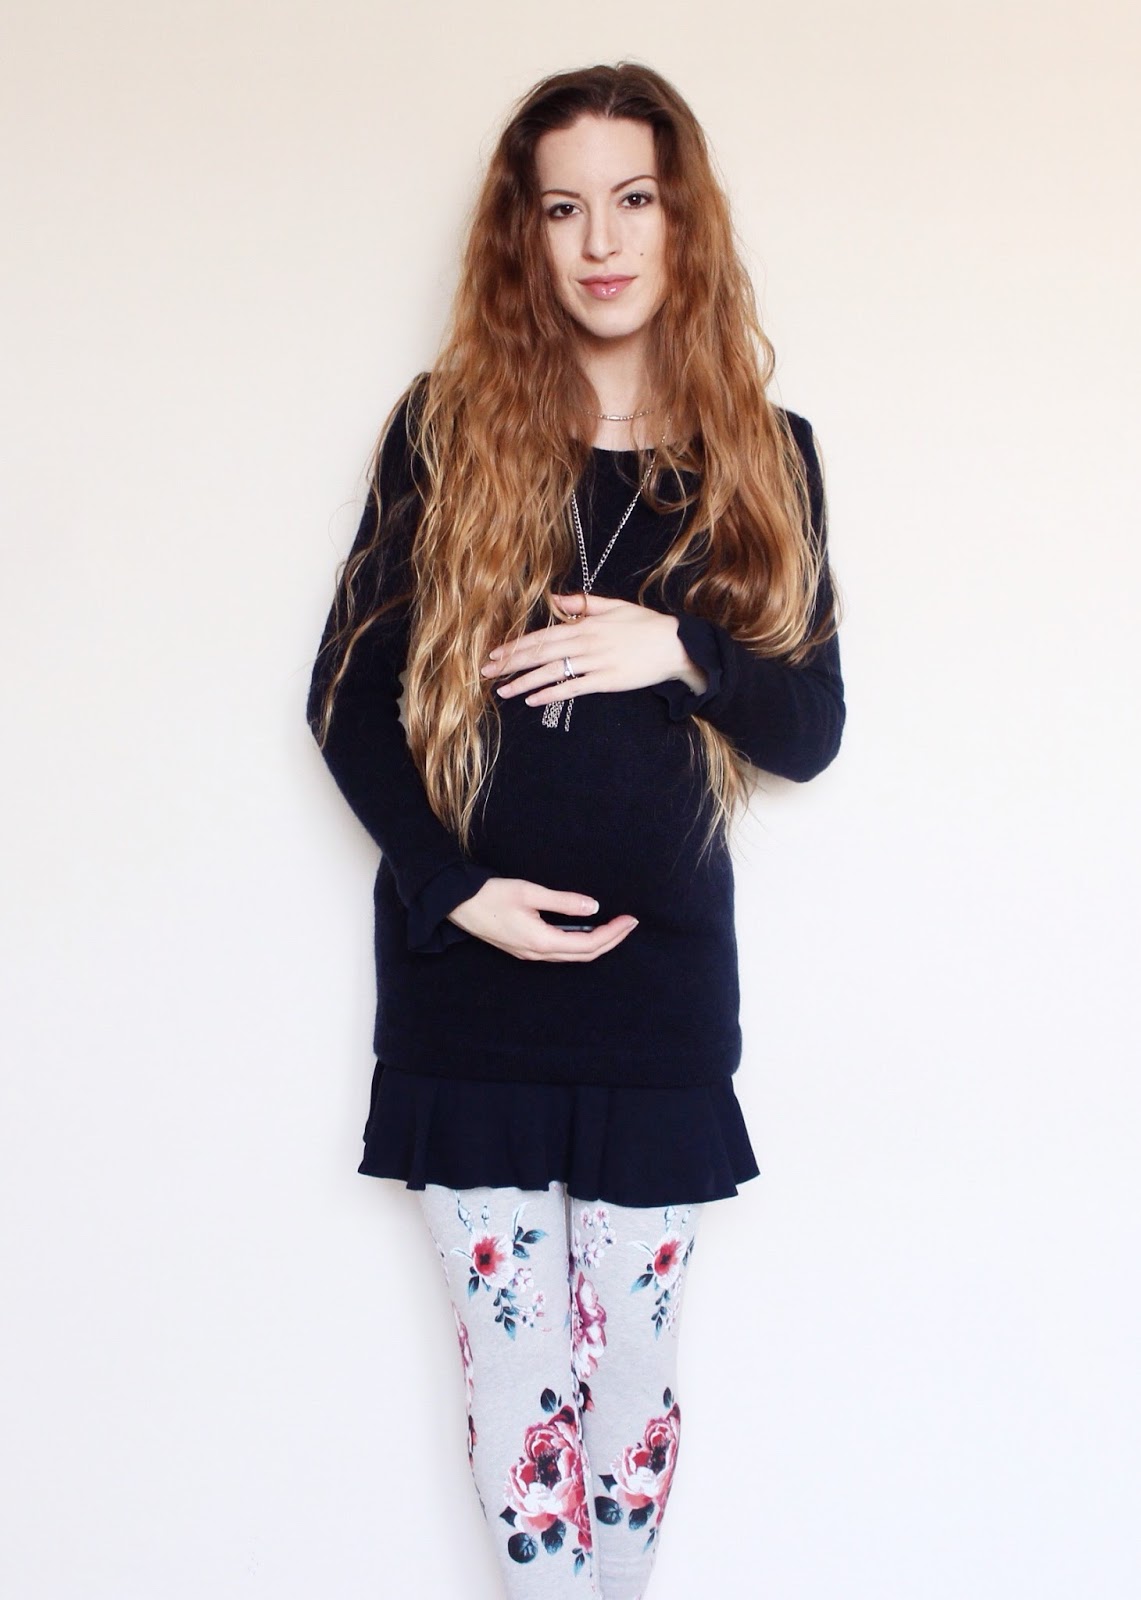 wolf and lace blog fashion style beauty hair makeup hippie gypsy boho bohemian girl girls woman women cute love beautiful fun pretty swag stylish design model outfit look lookbook ootd jewelry shopping accessories bag purse glam how to diy boots shoes heels free people freepeople fp fpgirls fpme ideas pregnant pregnancy baby bump maternity style the bump